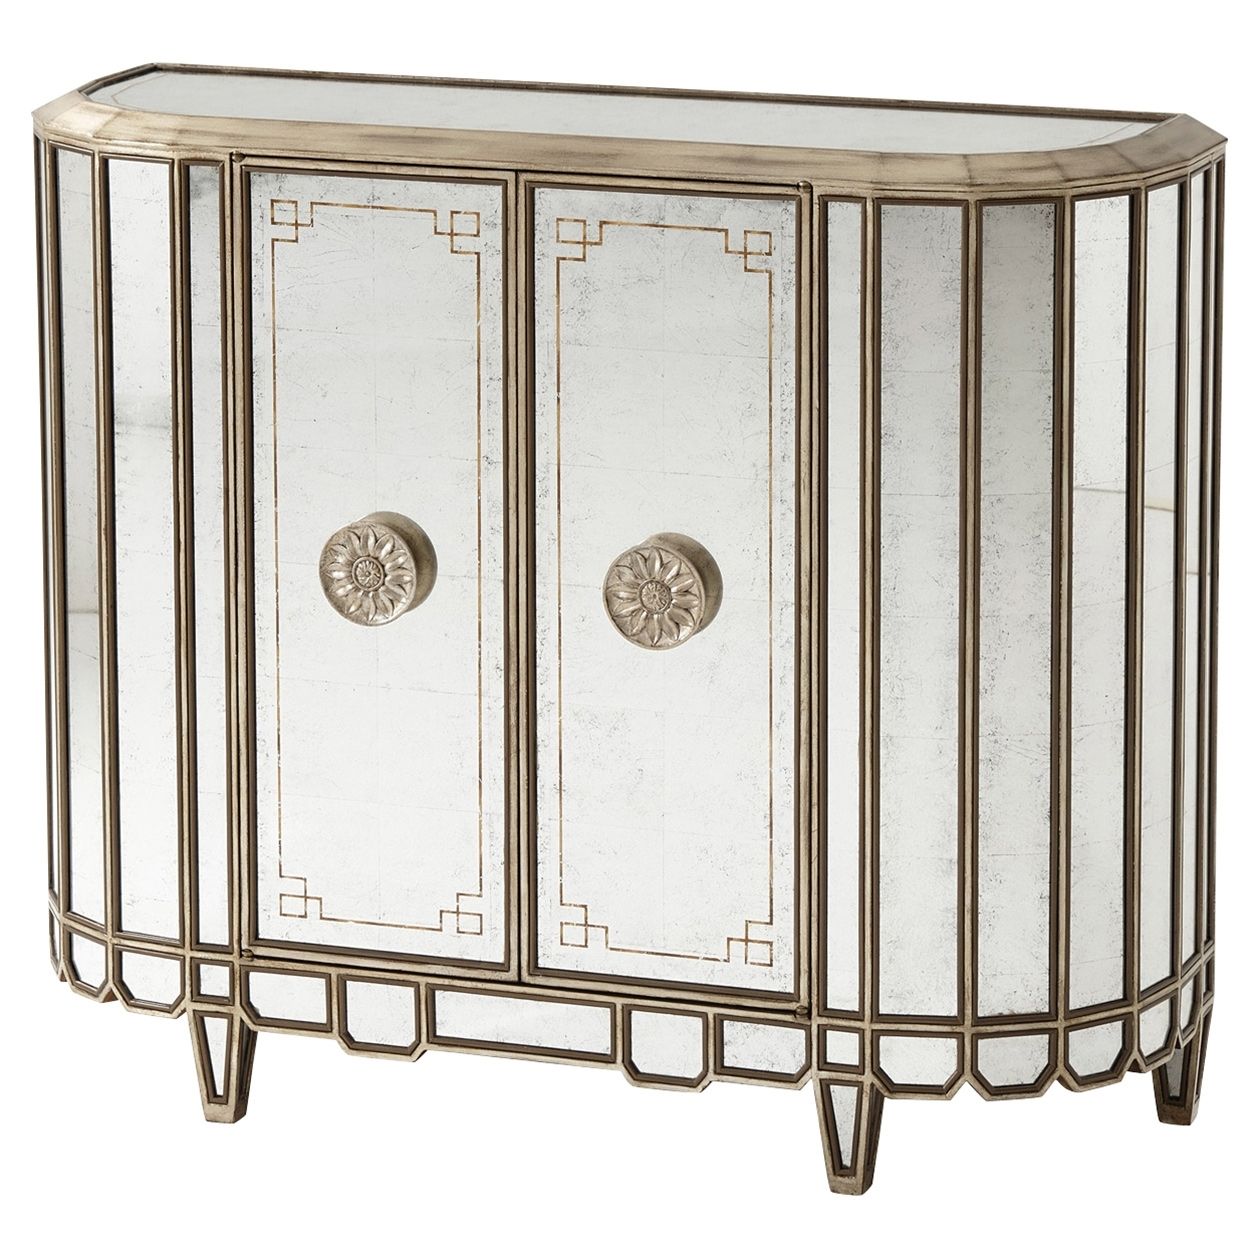 Buffets & Sideboards | Kathy Kuo Home Within Recent Aged Mirrored 2 Door Sideboards (View 11 of 20)